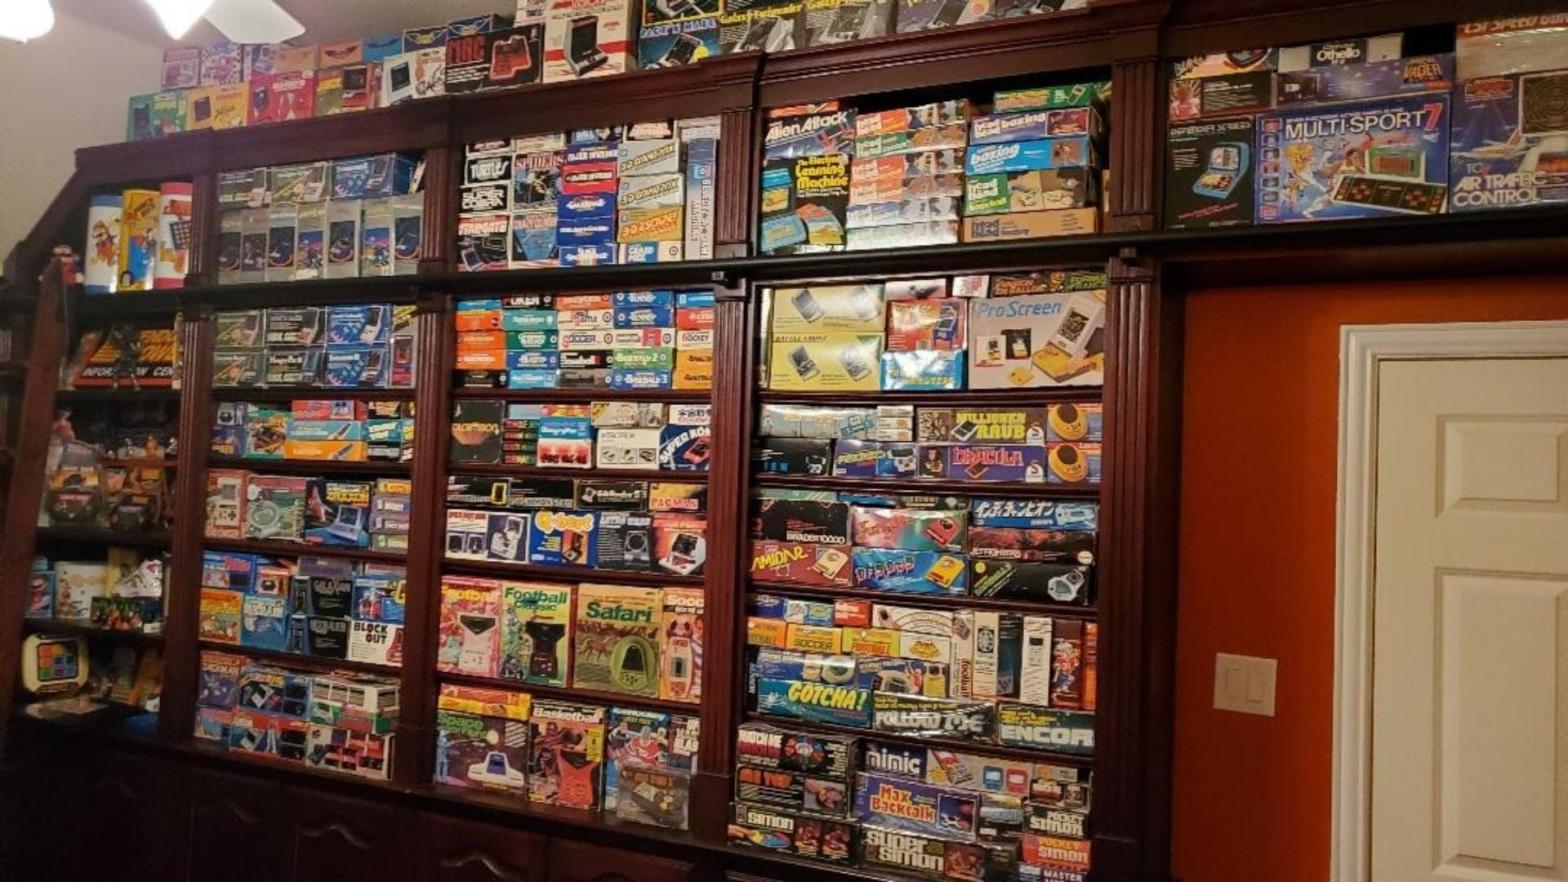 Linda Guillory's game room contains over 3000 pieces collected from around the world. (Photo: Linda Guillory)